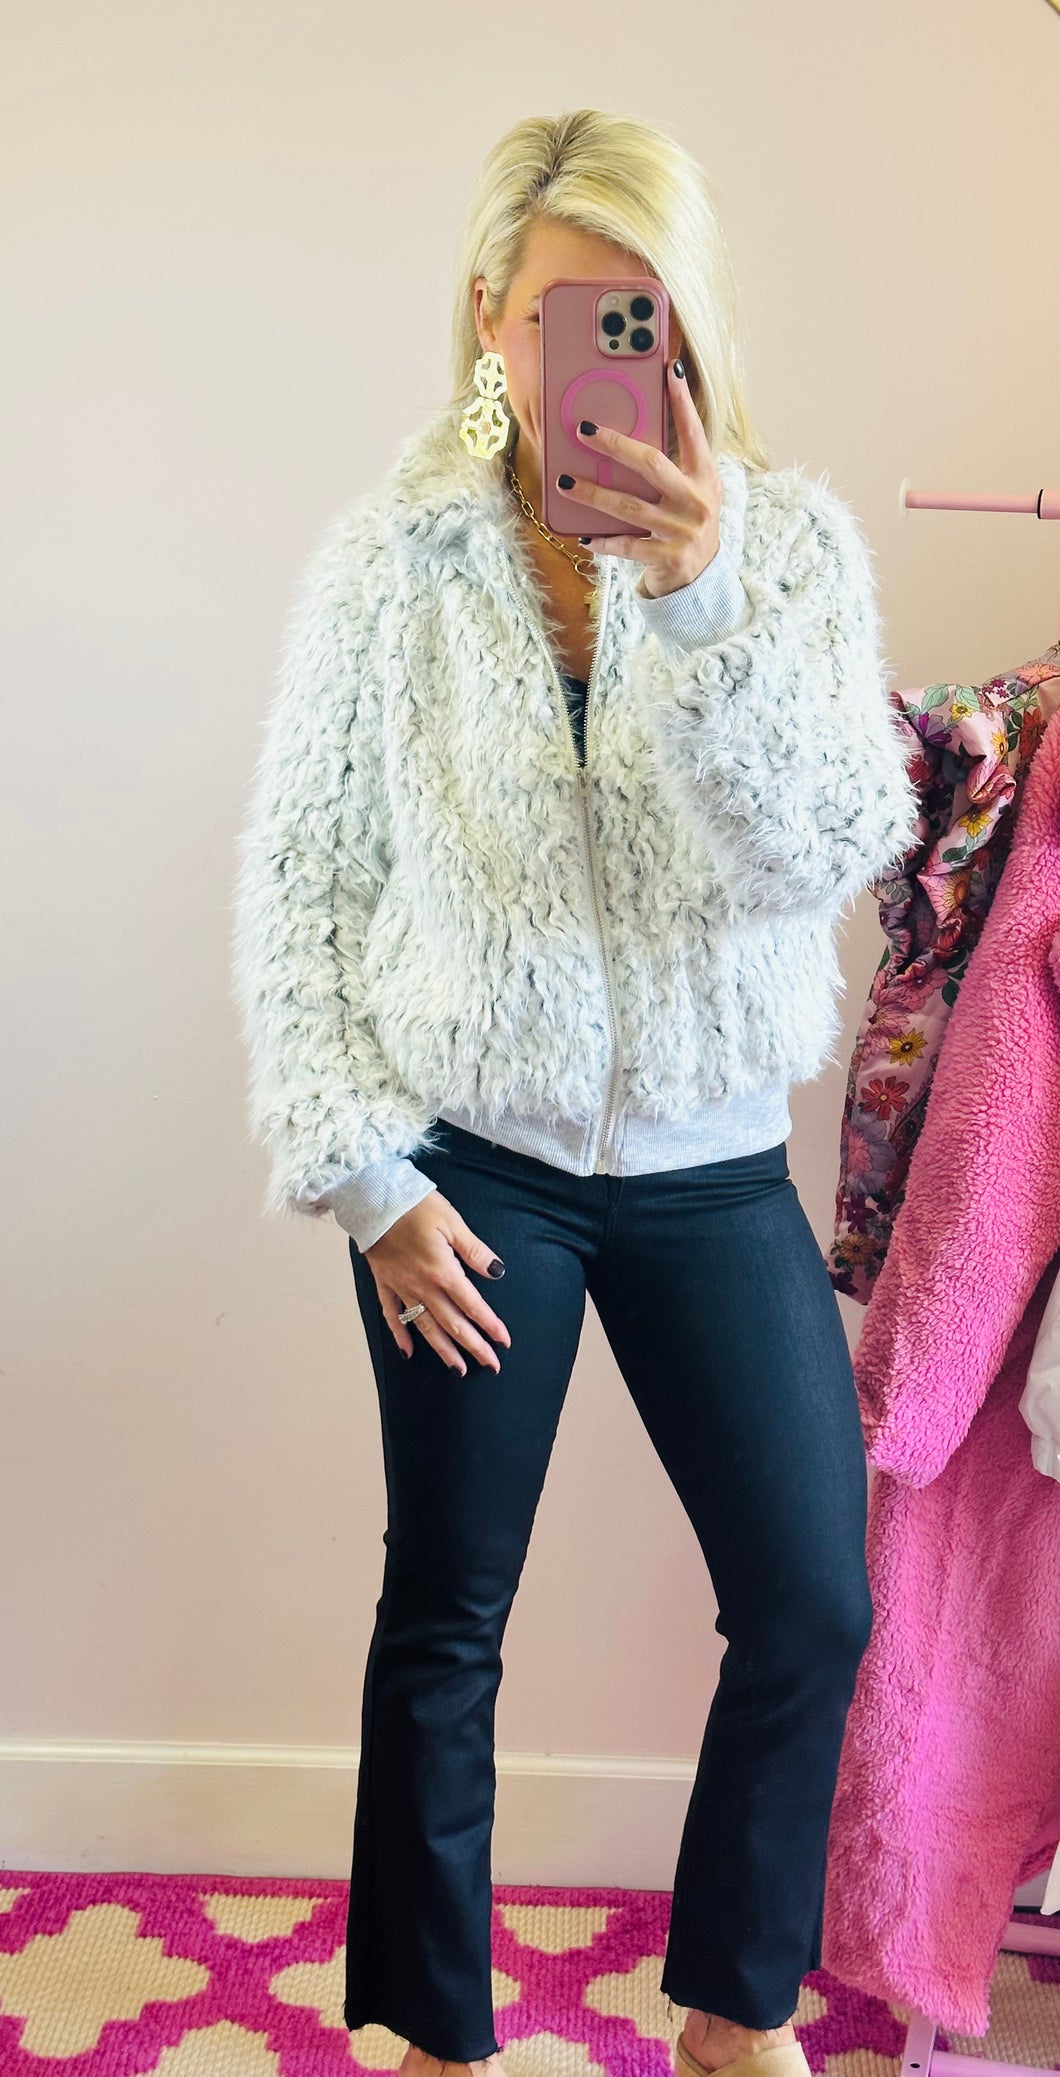 The Fuzzy Jacket Top in Light Grey/White